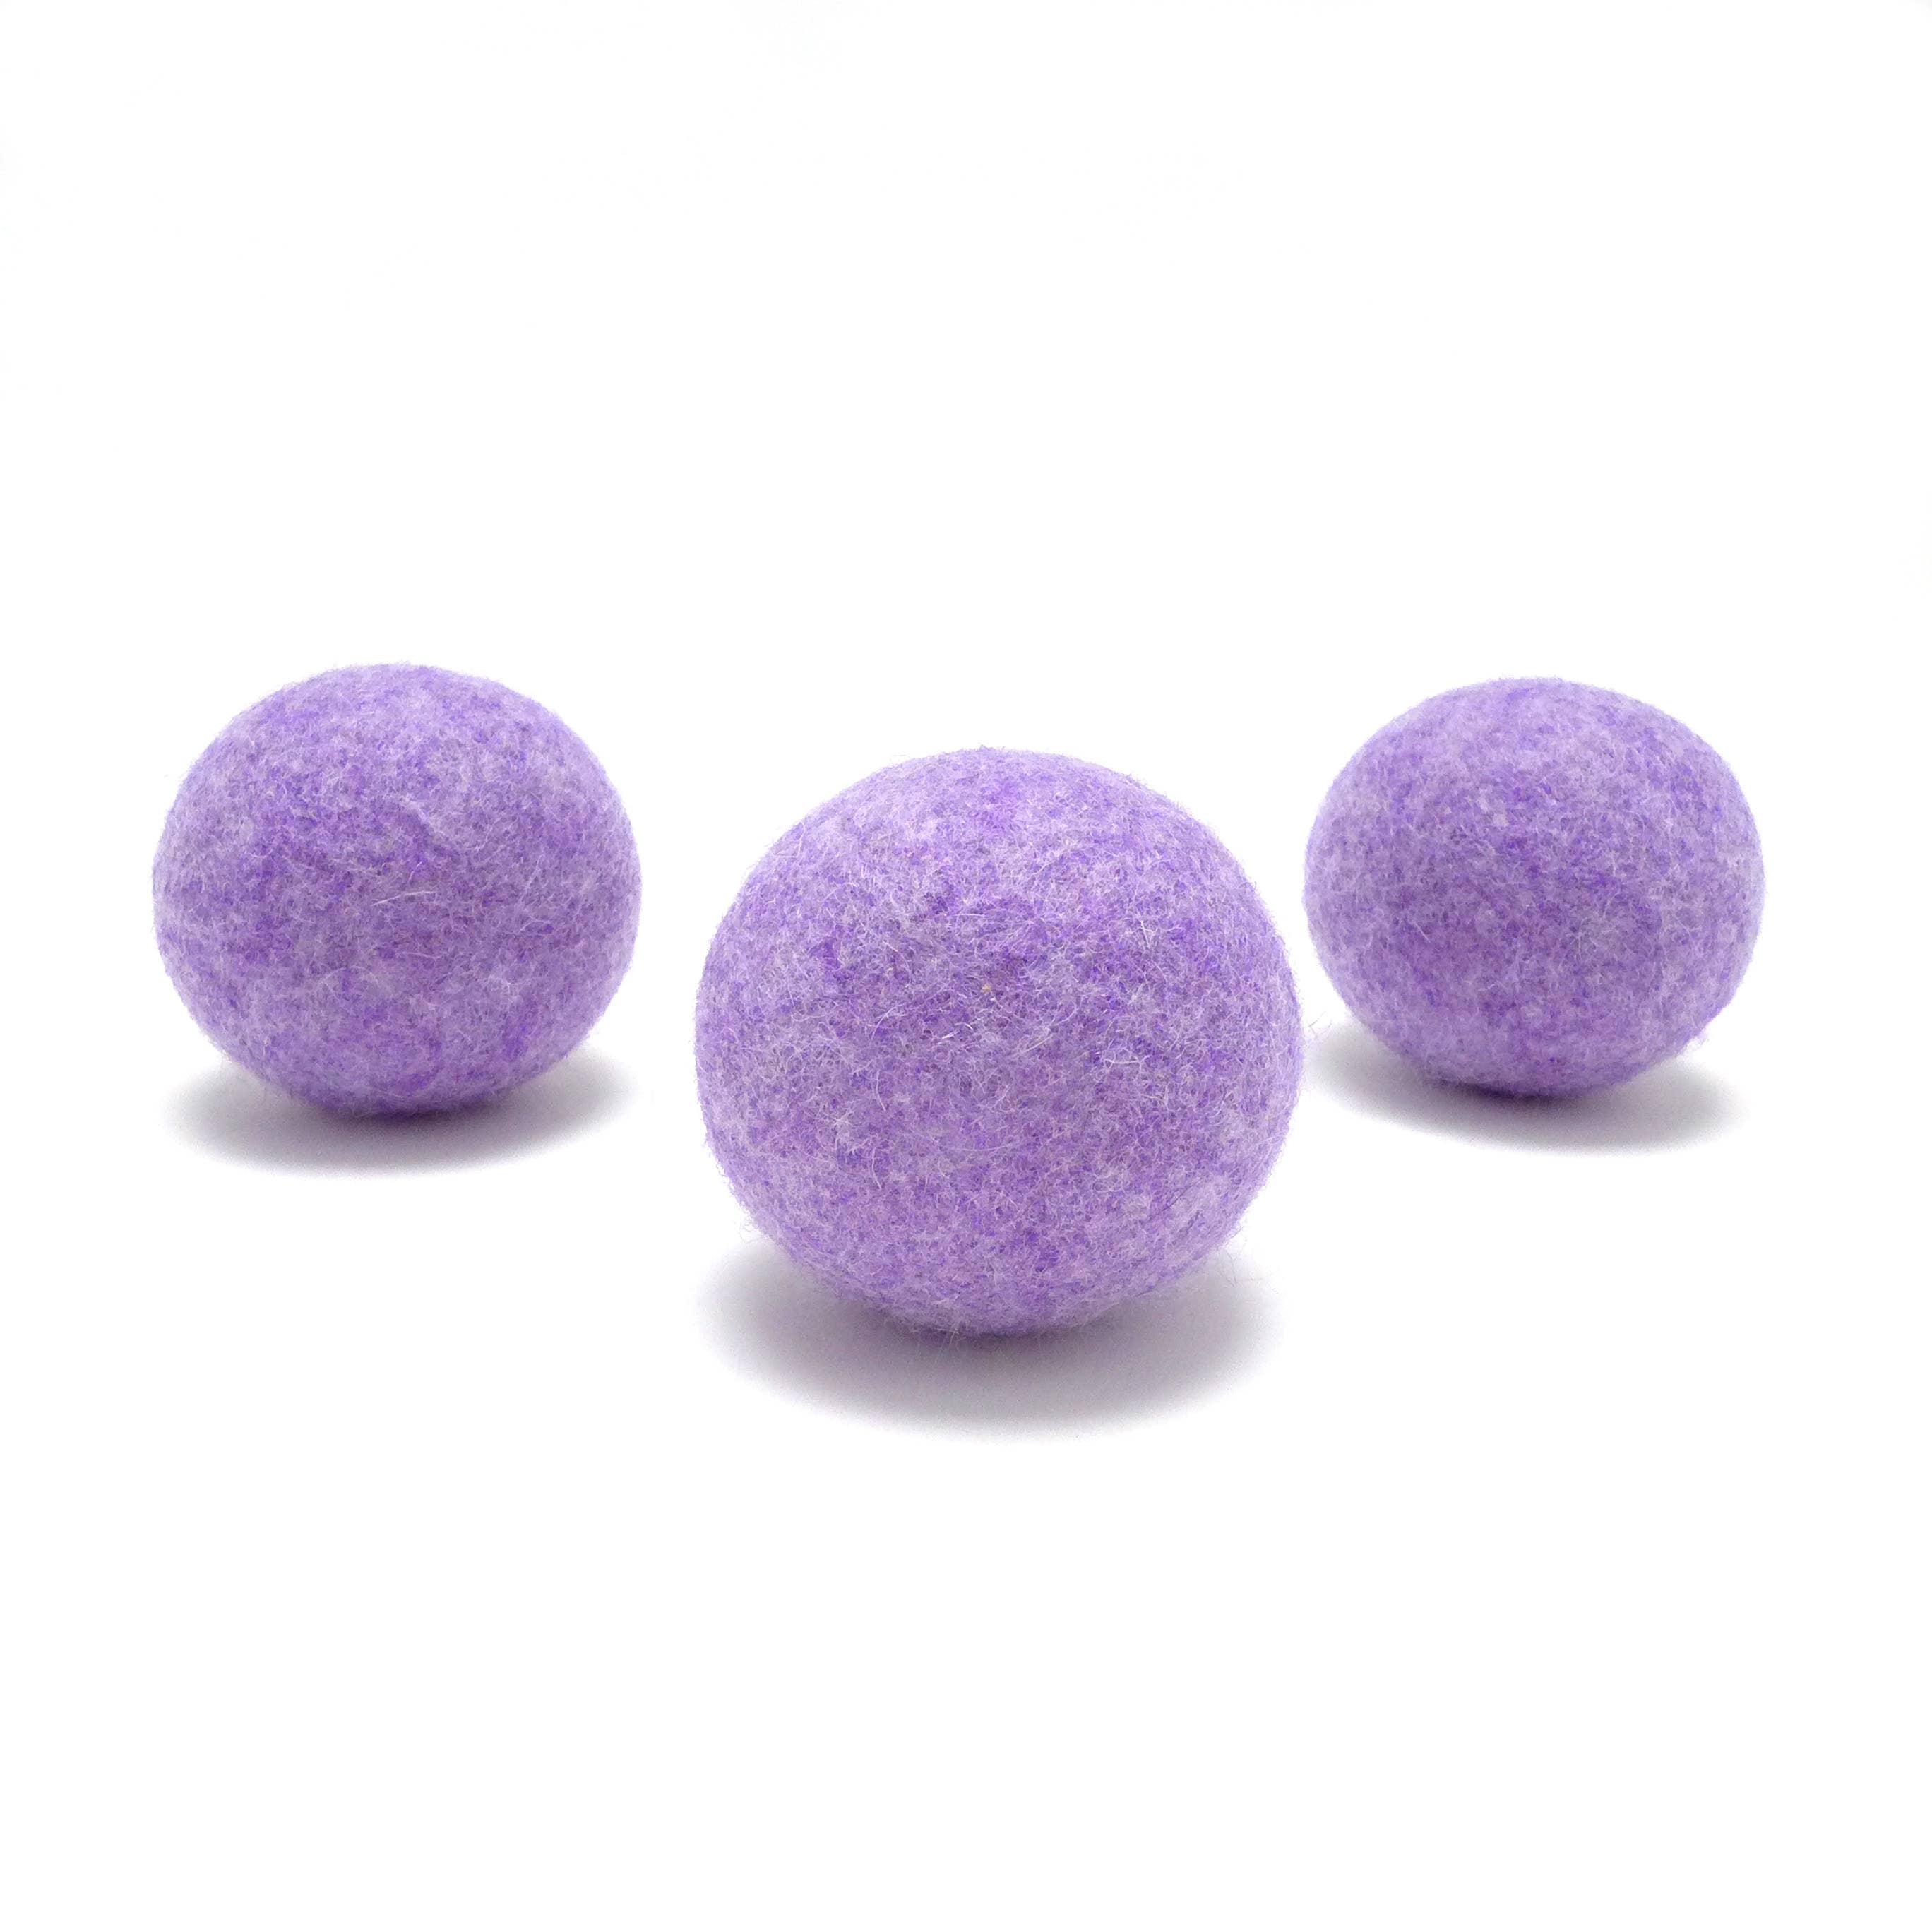 Wholesale 40pcs Wool Dryer balls Best price ***SPECIAL INTRO OFFER *** 